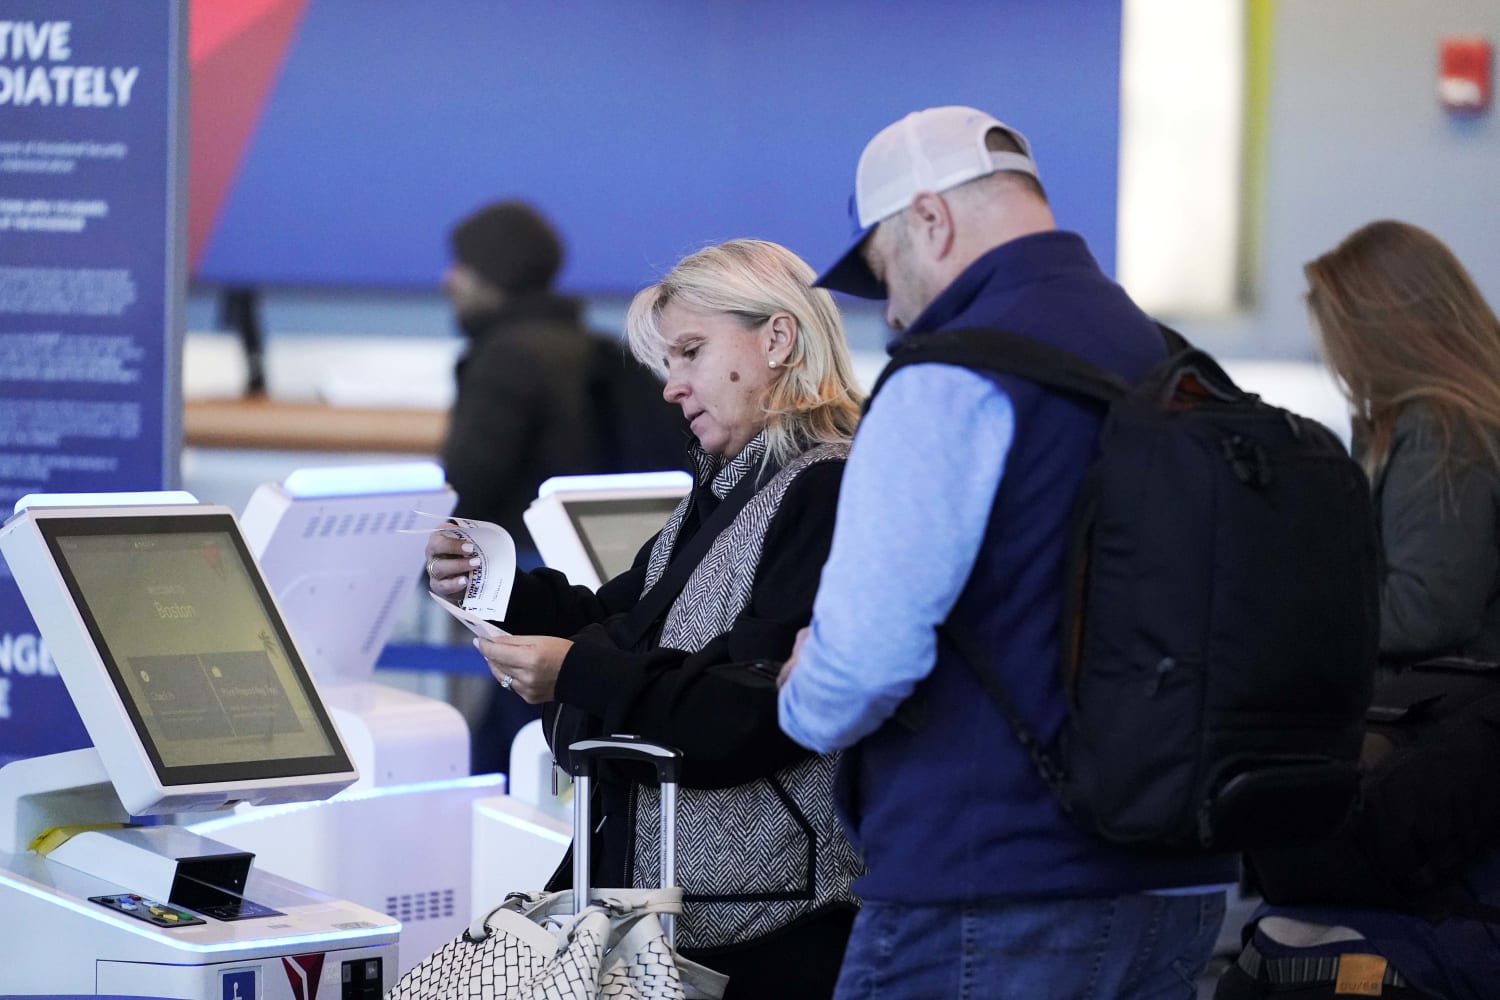 Airlines work to move past delays after FAA outage blamed on corrupted file